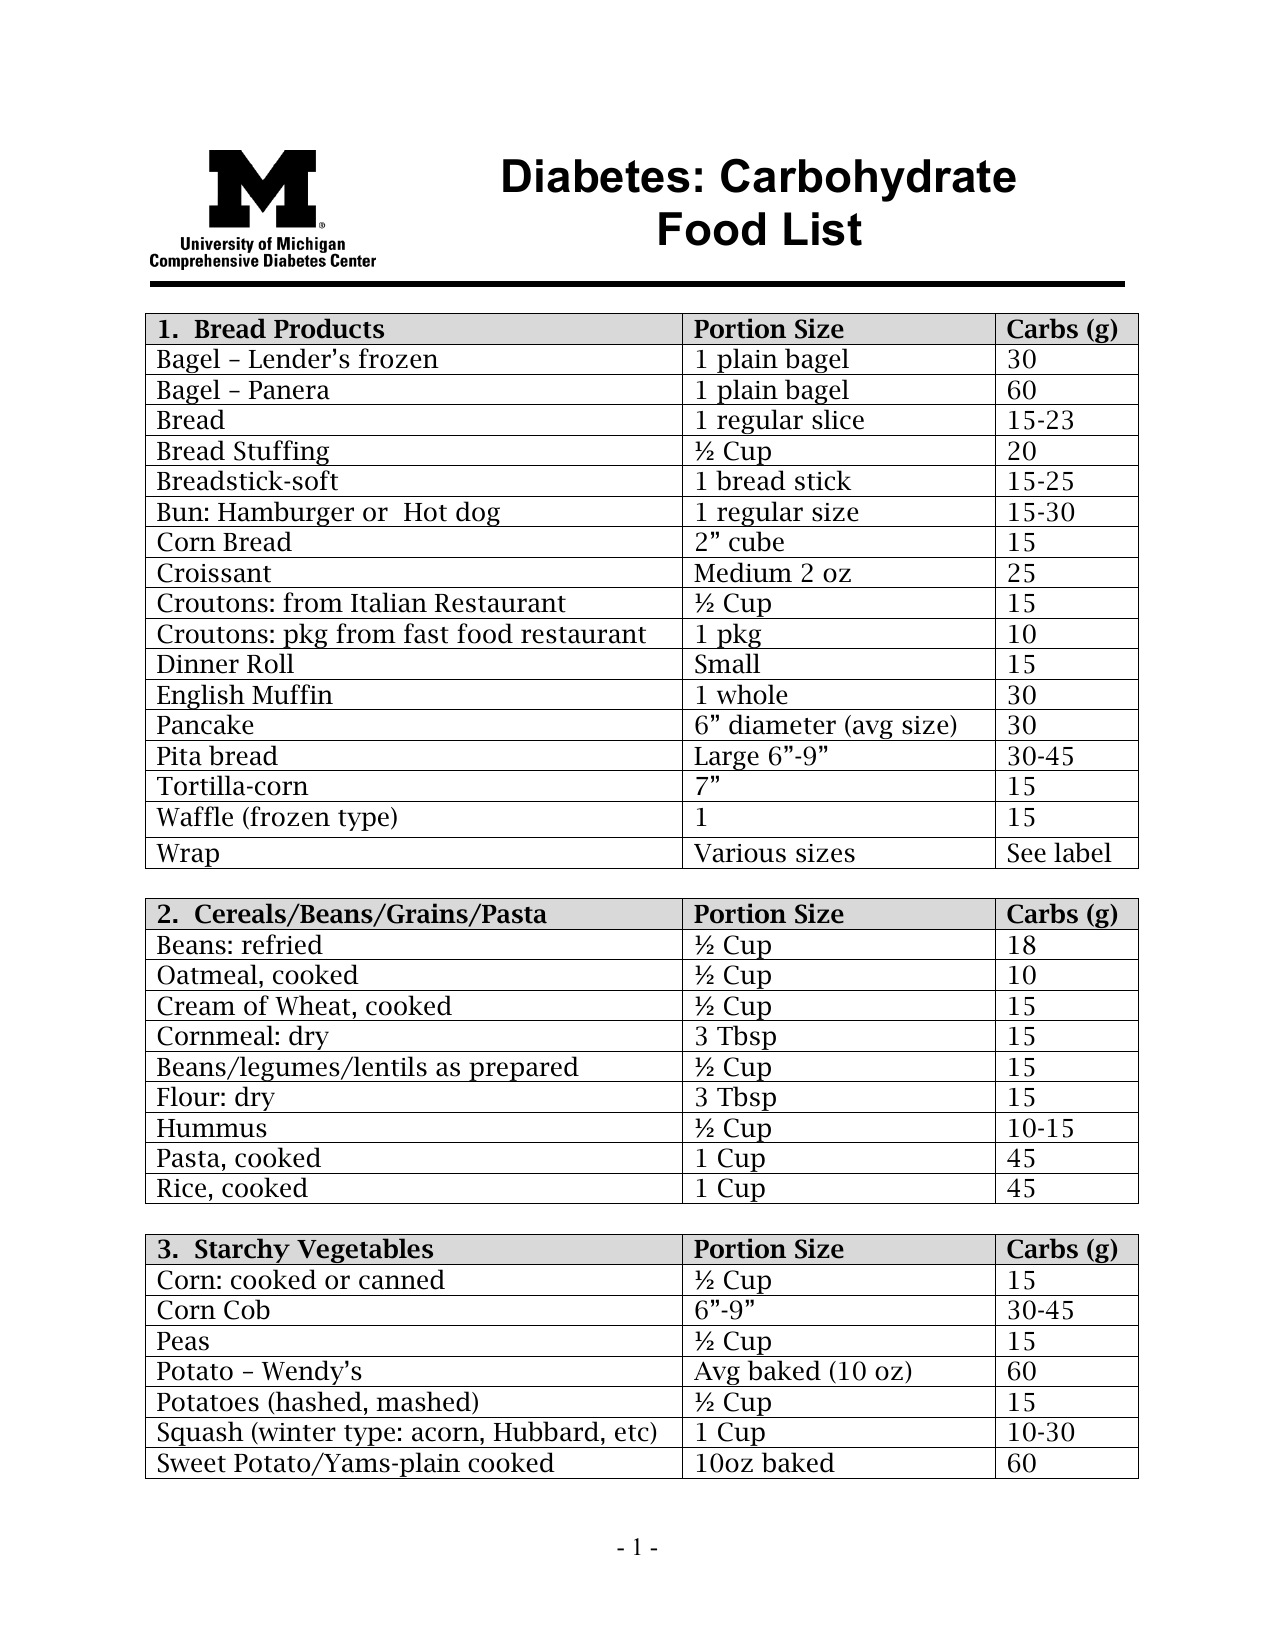 Diabetes Carbohydrate Food List University of Michigan Health